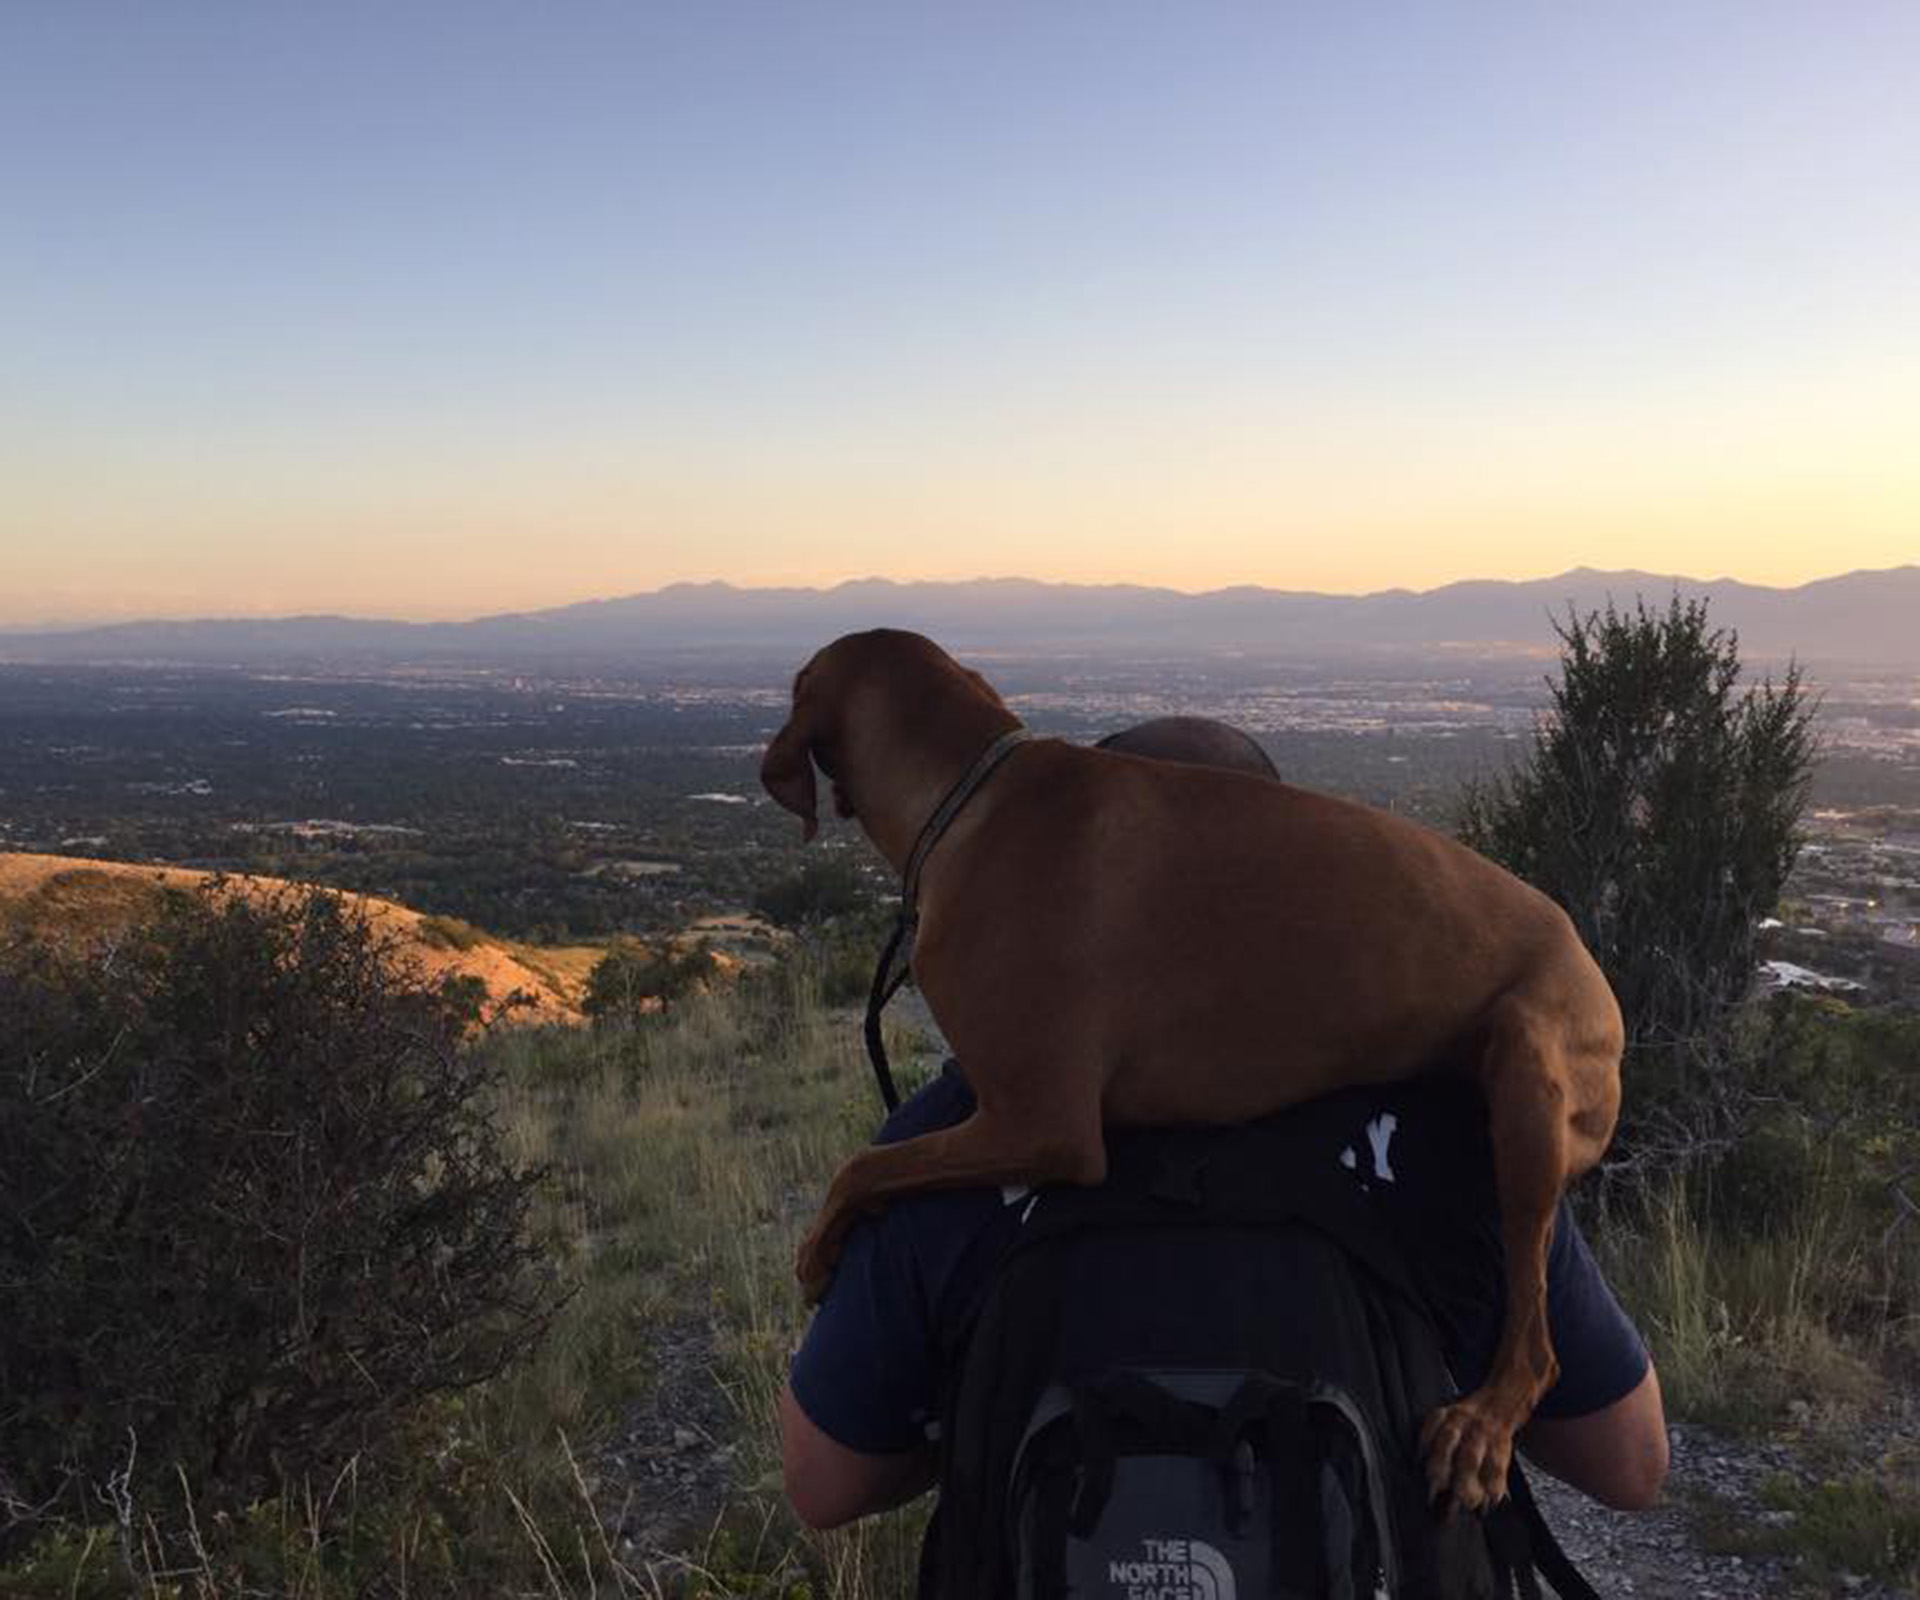 Hero firefighter carries injured dog down mountain